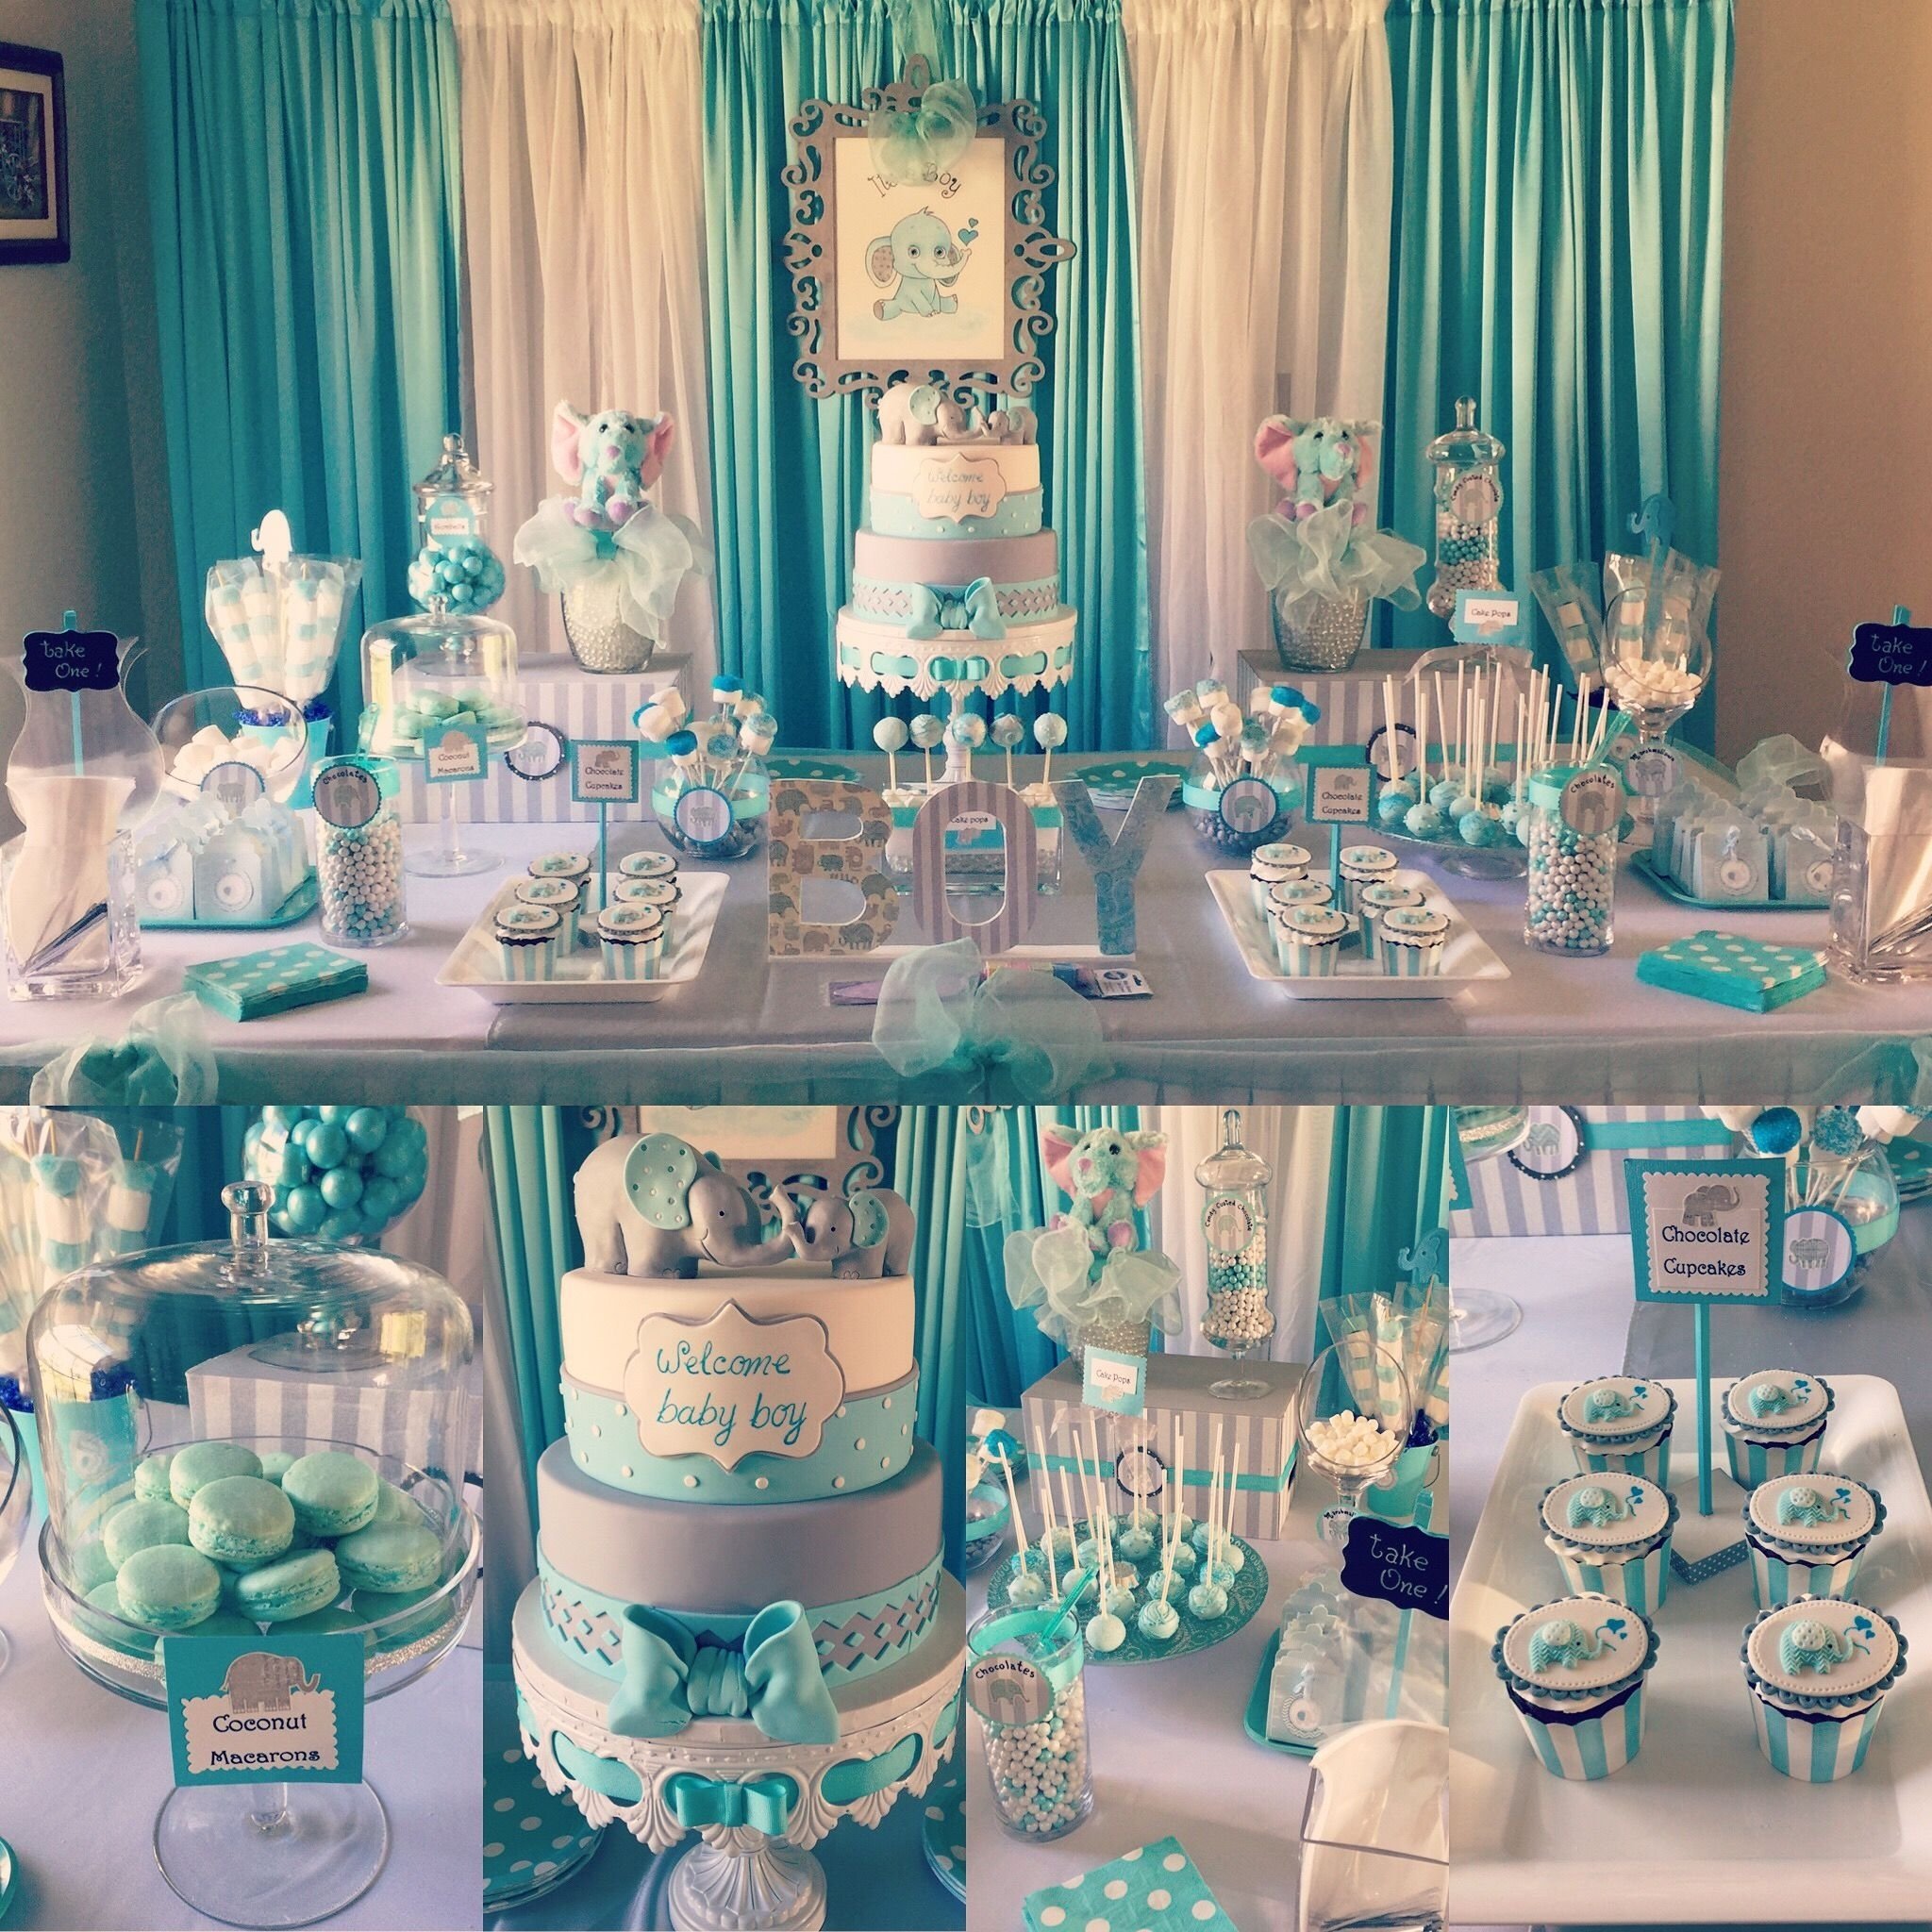 10 Trendy Baby Shower For Boys Ideas unique gender reveal party ideas that wont empty your wallet 3 2022